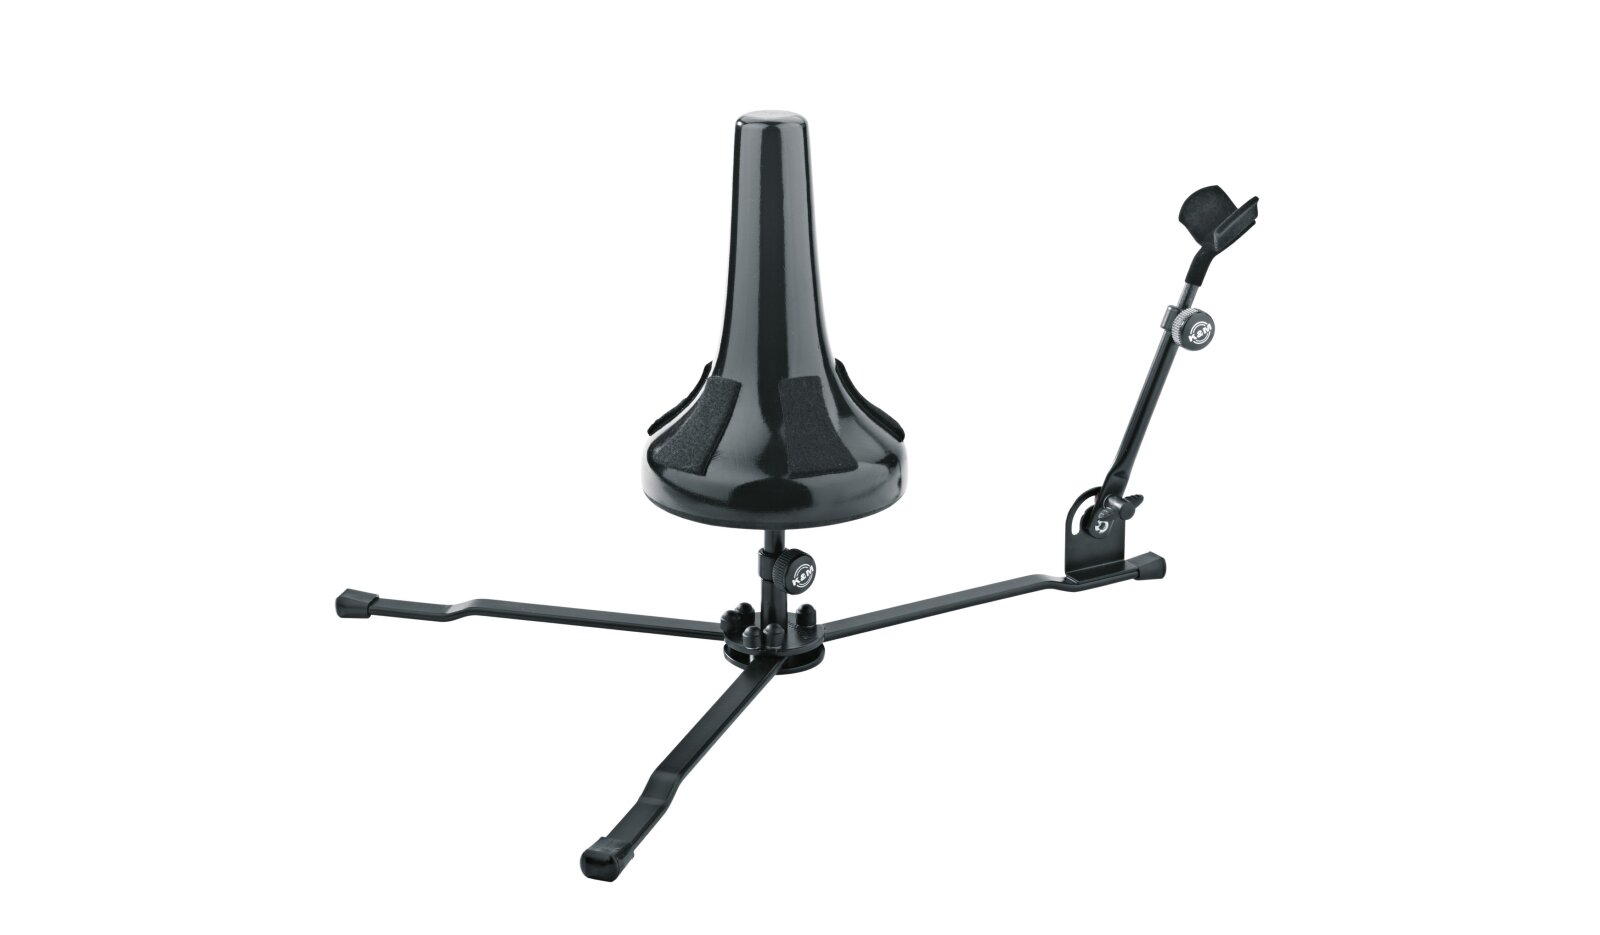 K & M 15140 - French Horn Stand - Black : photo 1